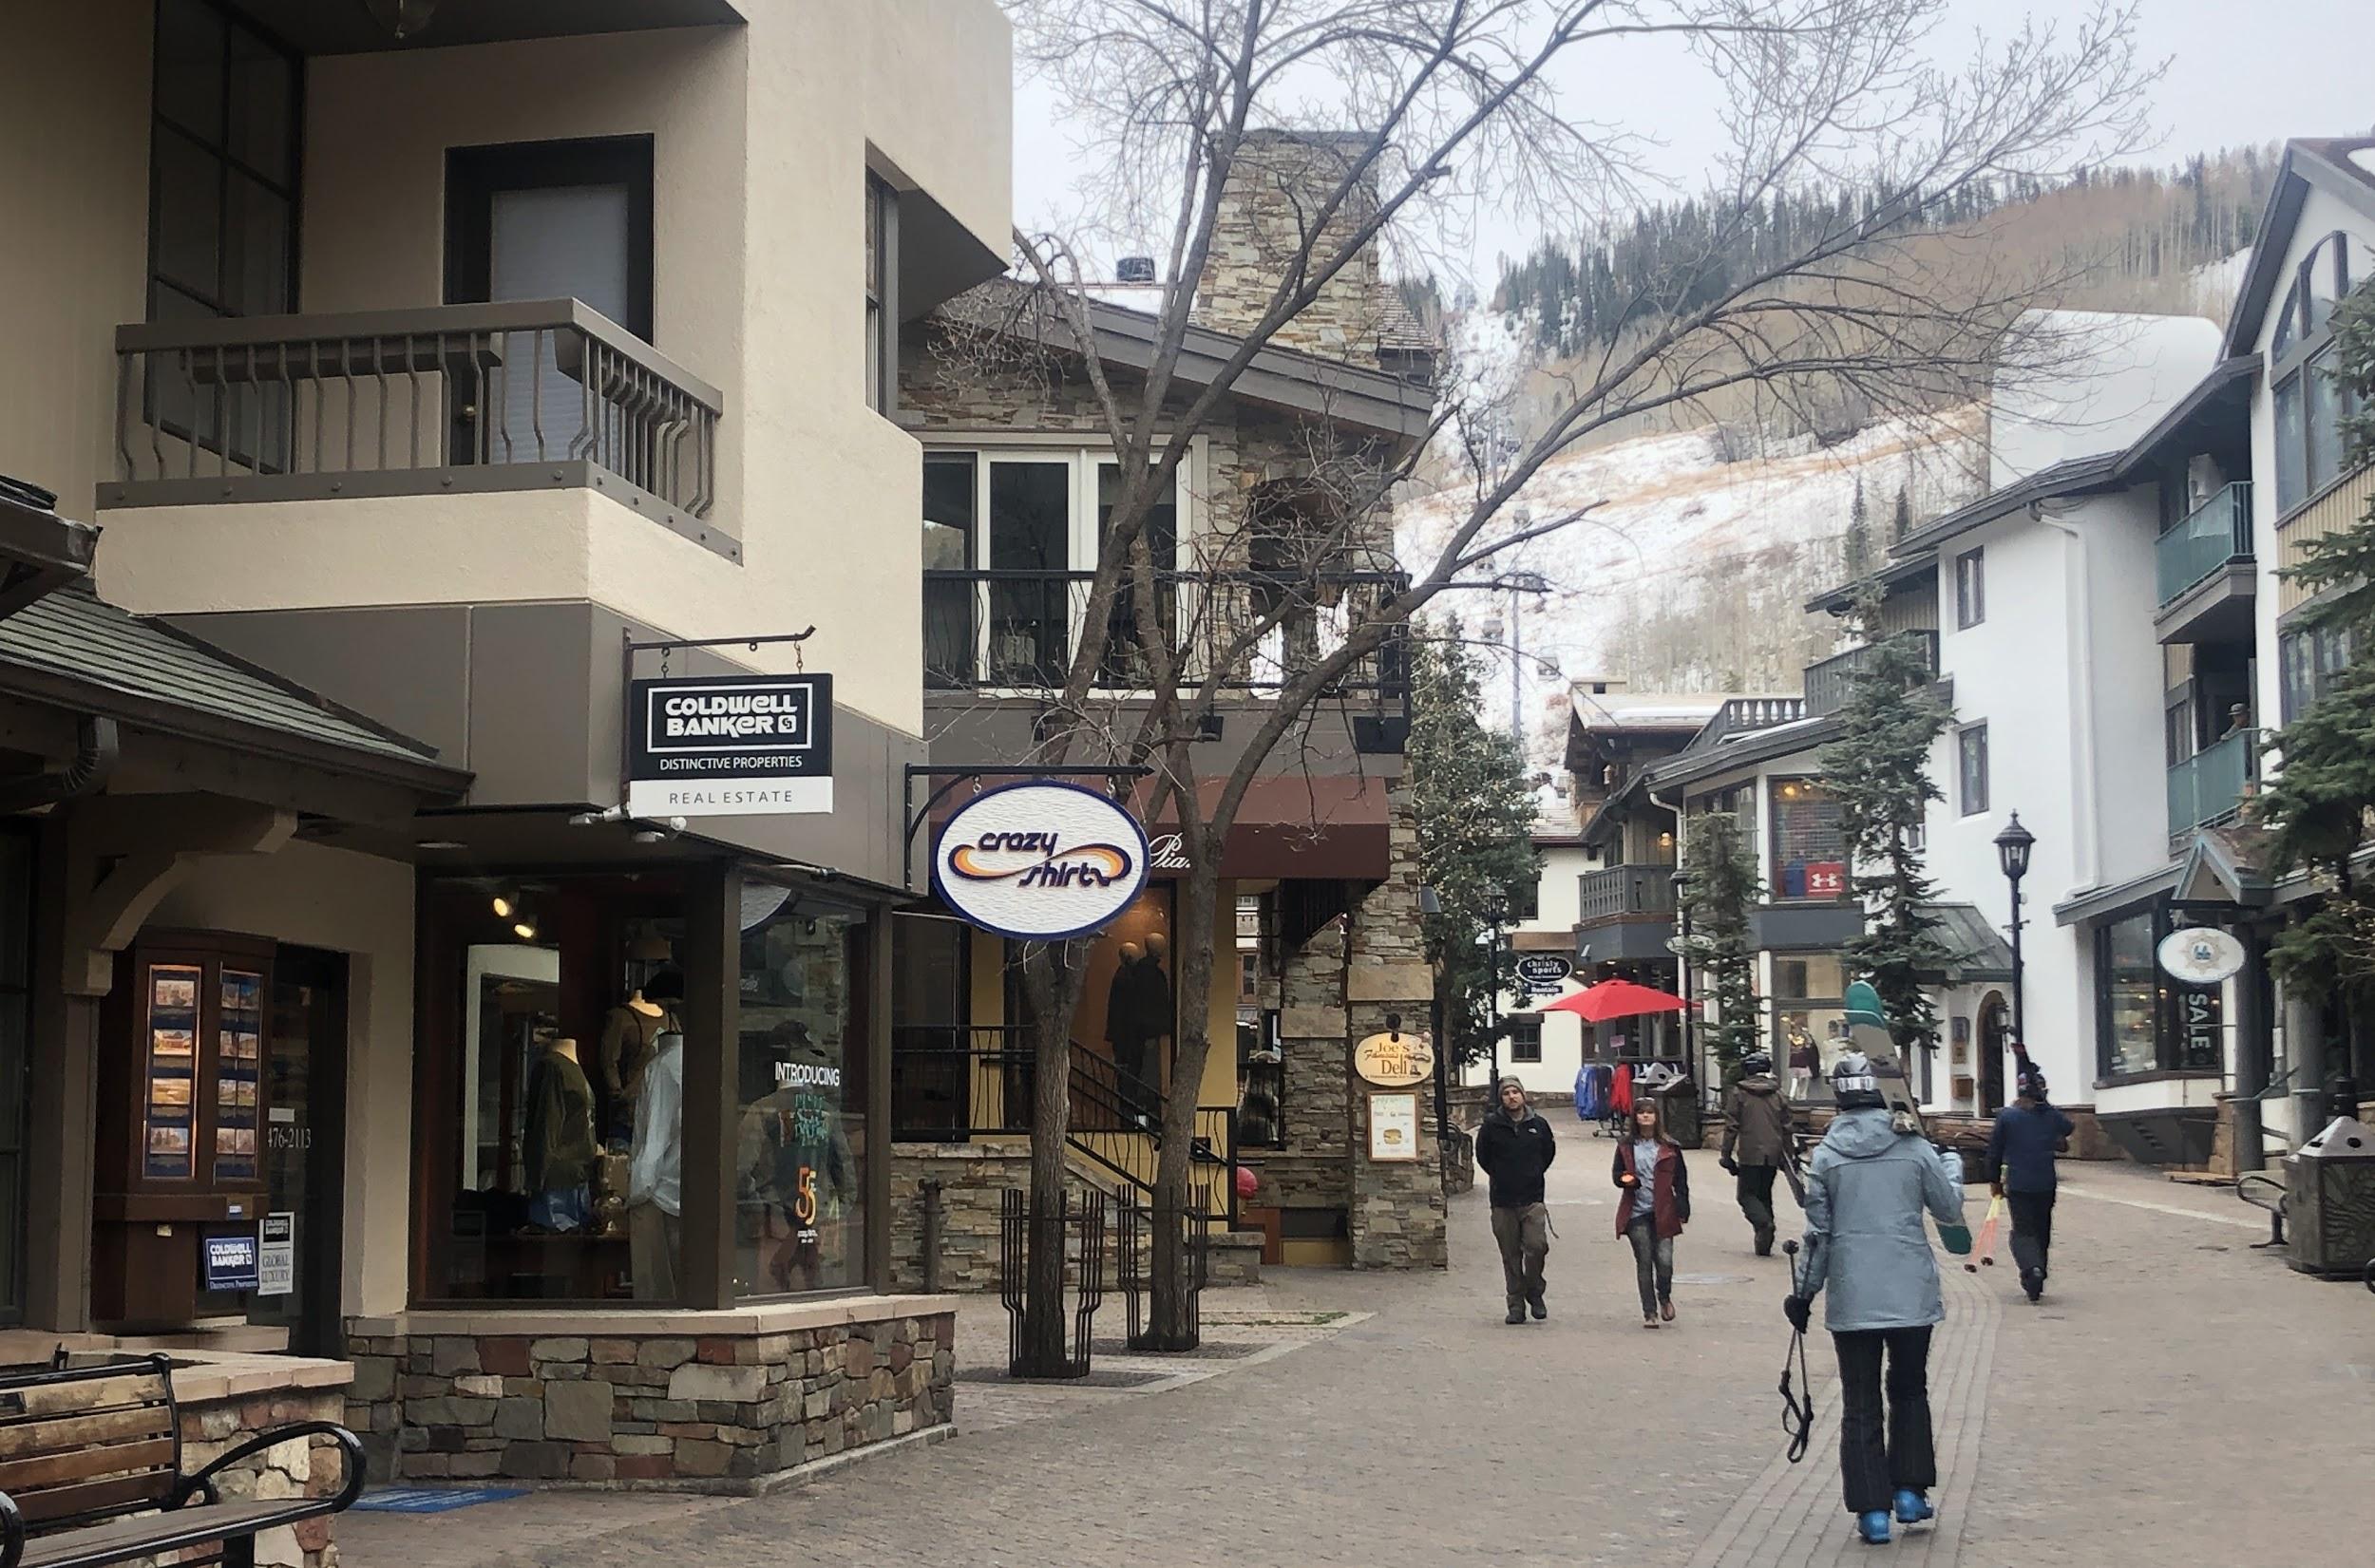 Is Your Home Overpriced In Vail Valley?